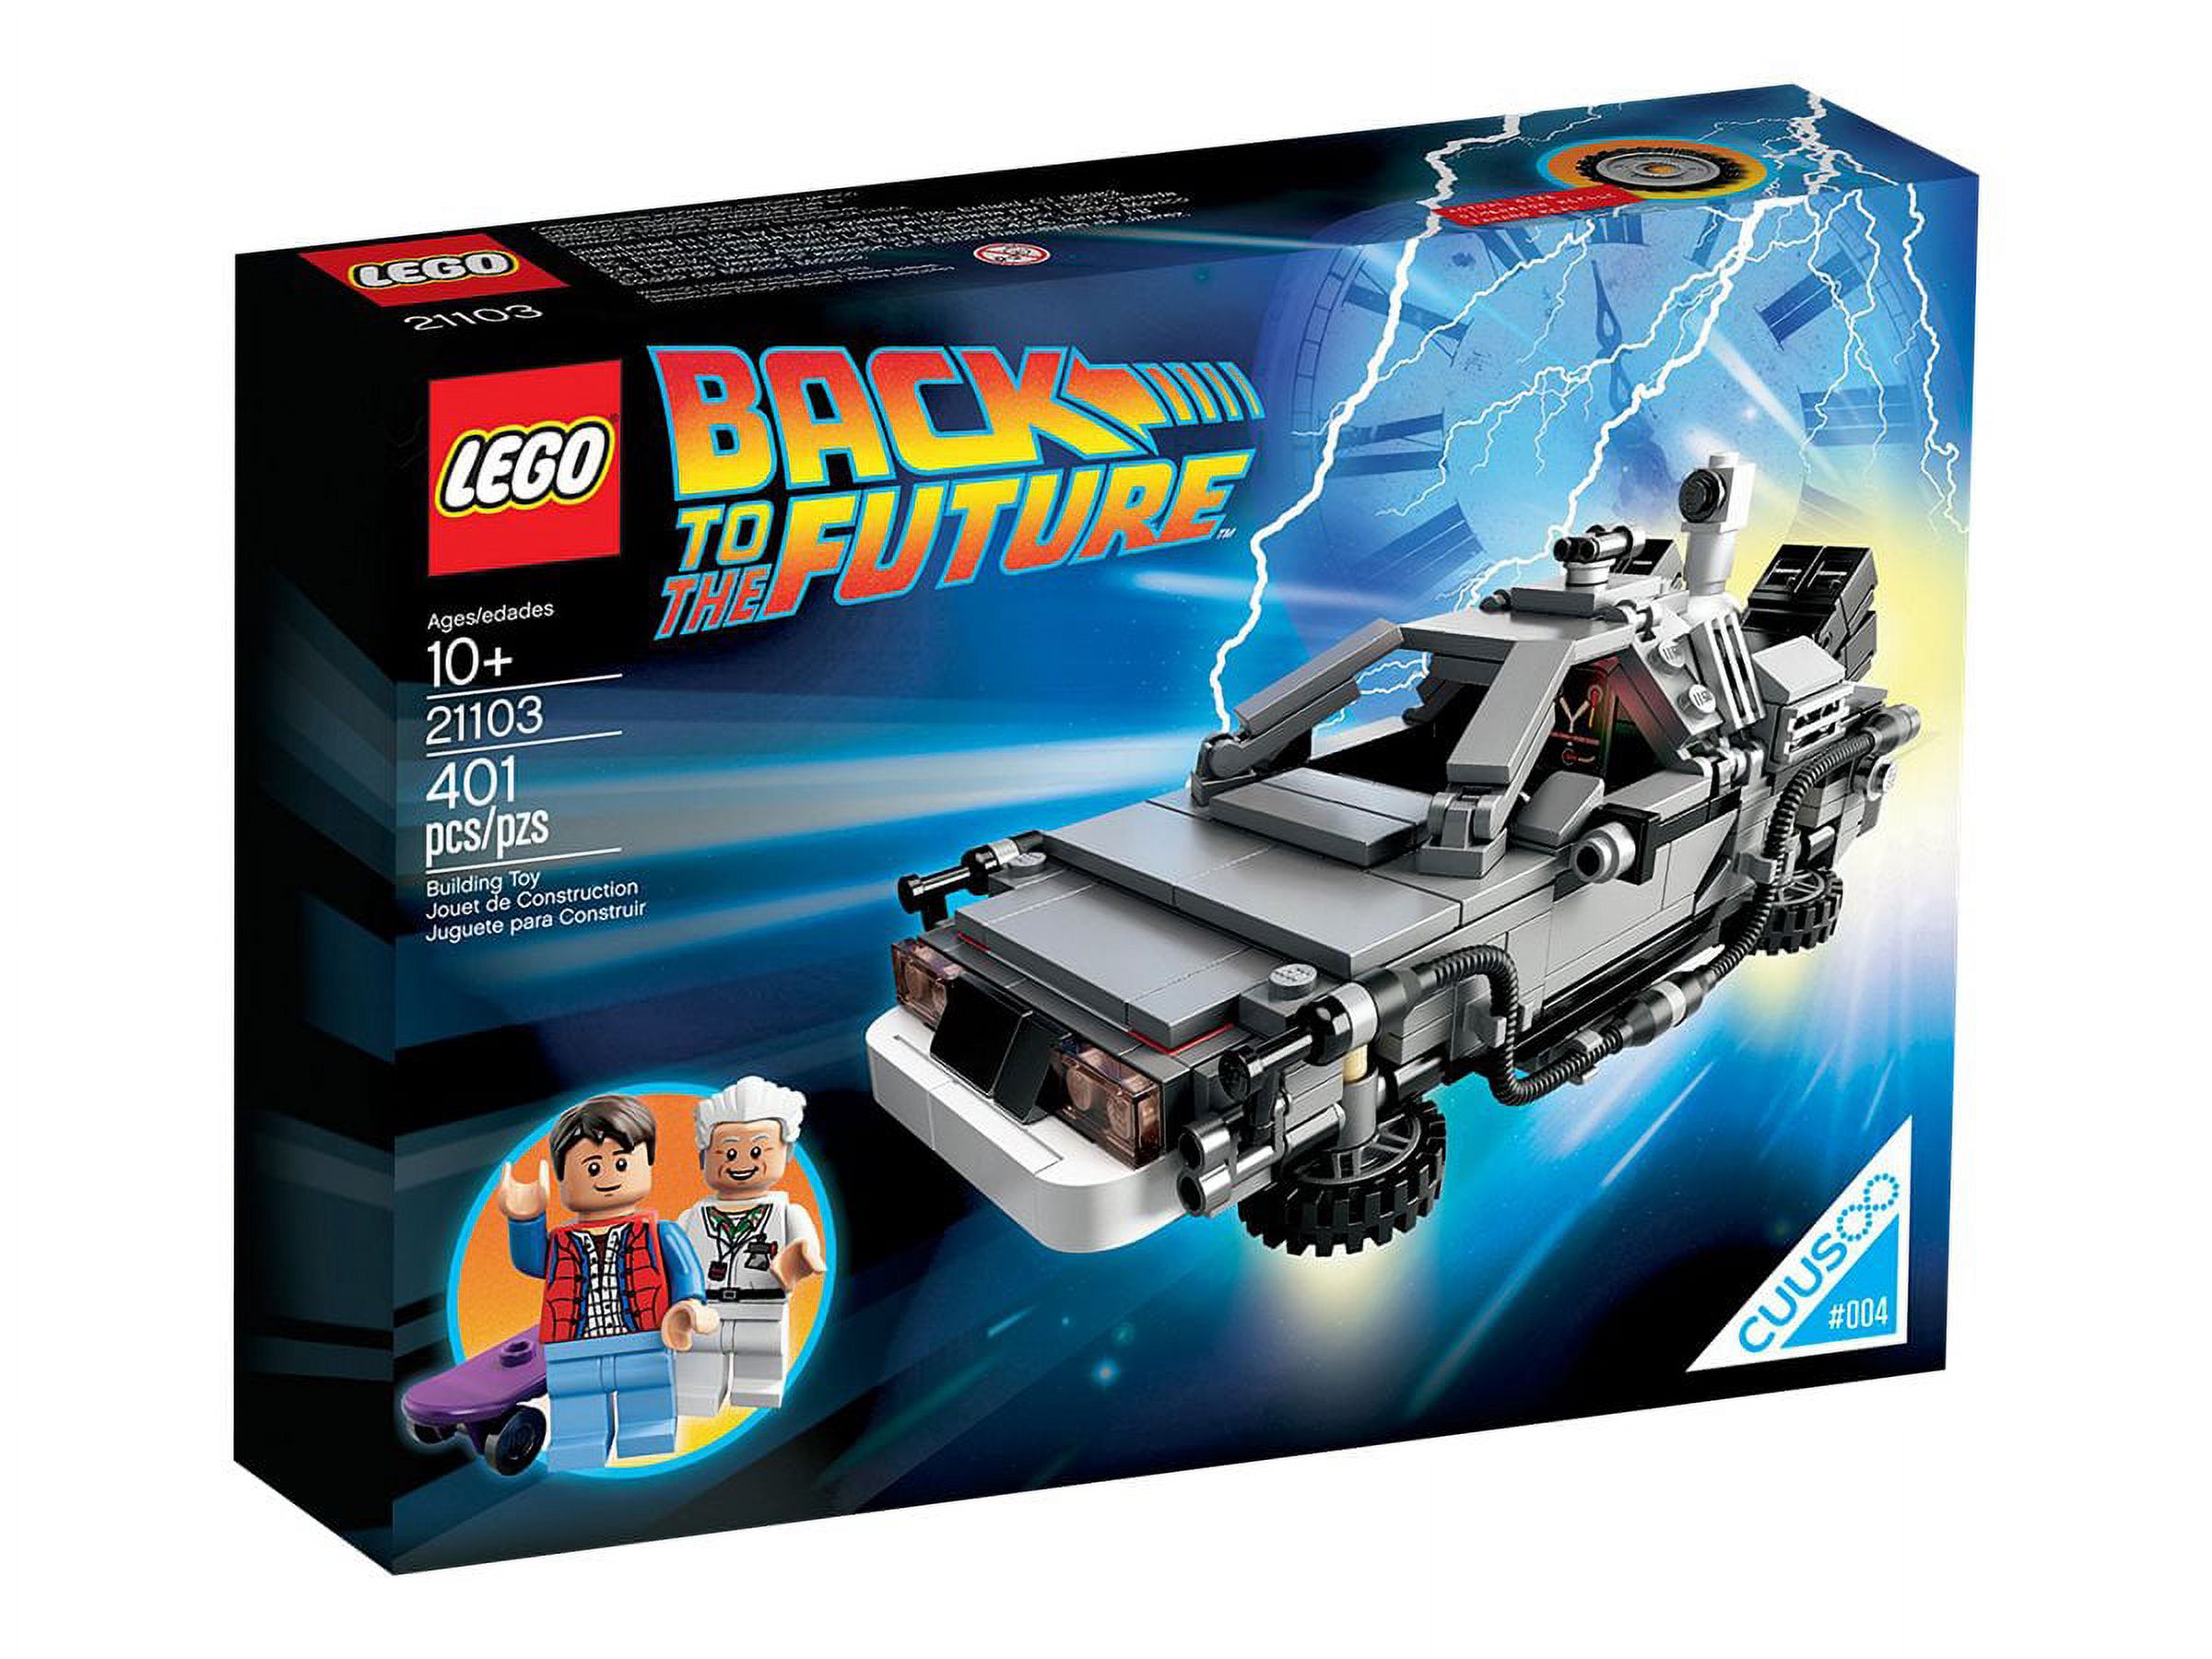 LEGO Cuusoo The DeLorean Time Machine Play Set - image 5 of 6